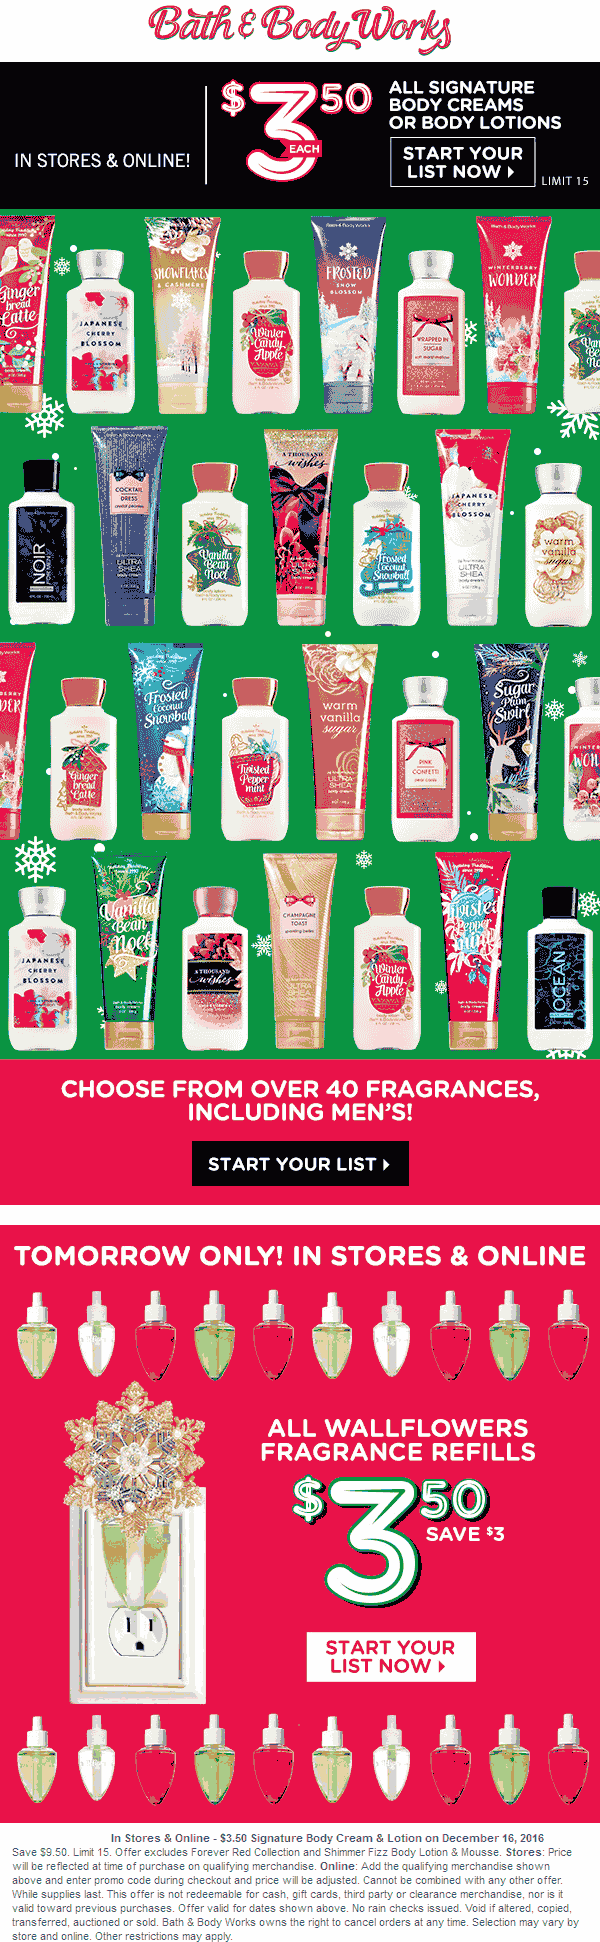 bath-body-works-june-2021-coupons-and-promo-codes